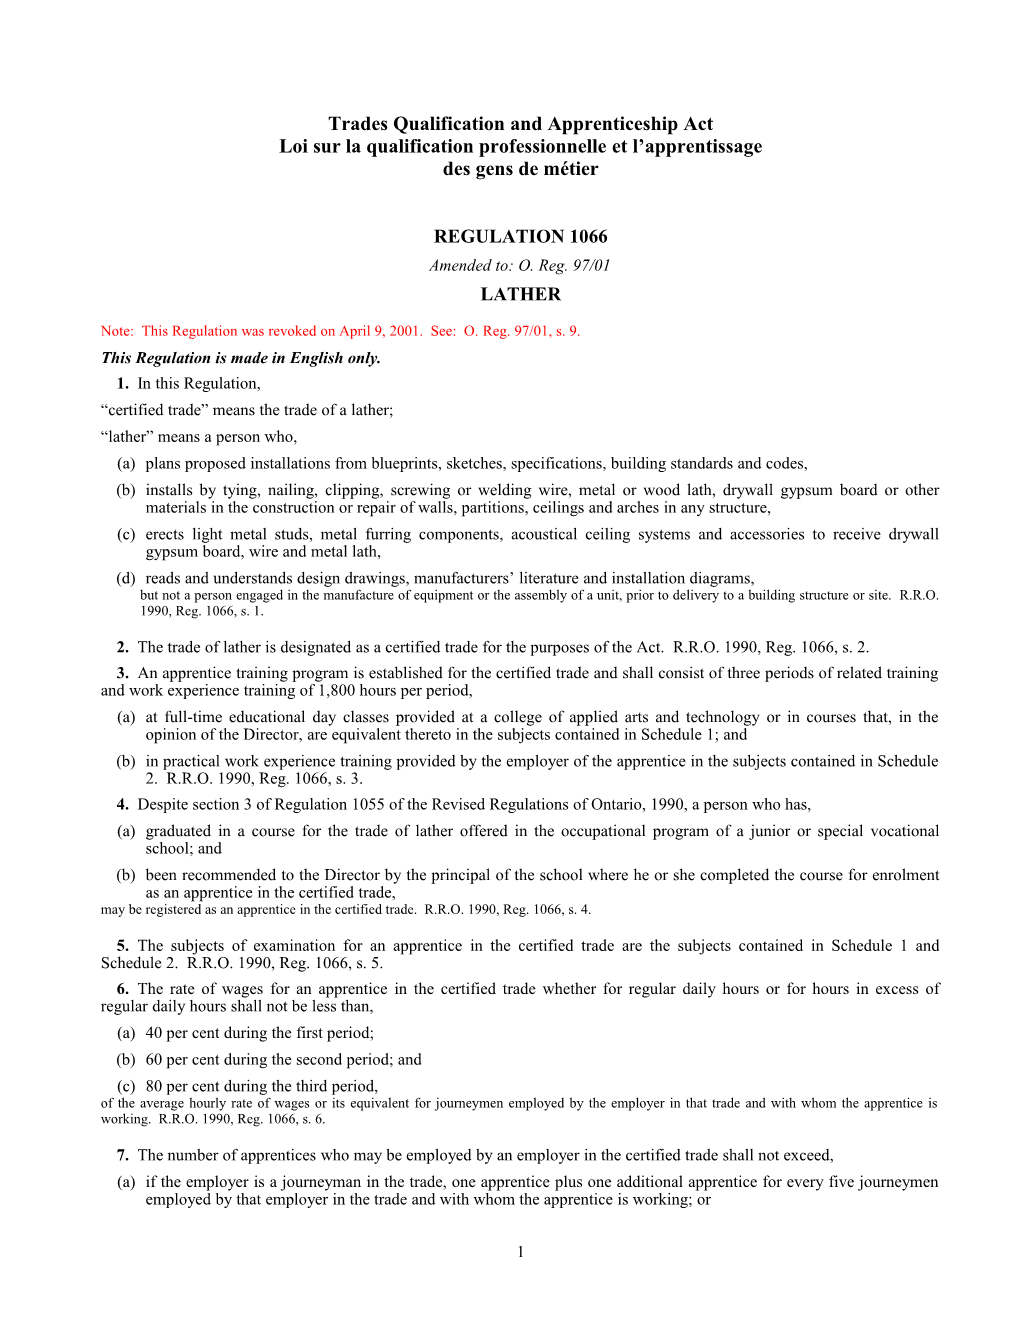 Trades Qualification and Apprenticeship Act - R.R.O. 1990, Reg. 1066